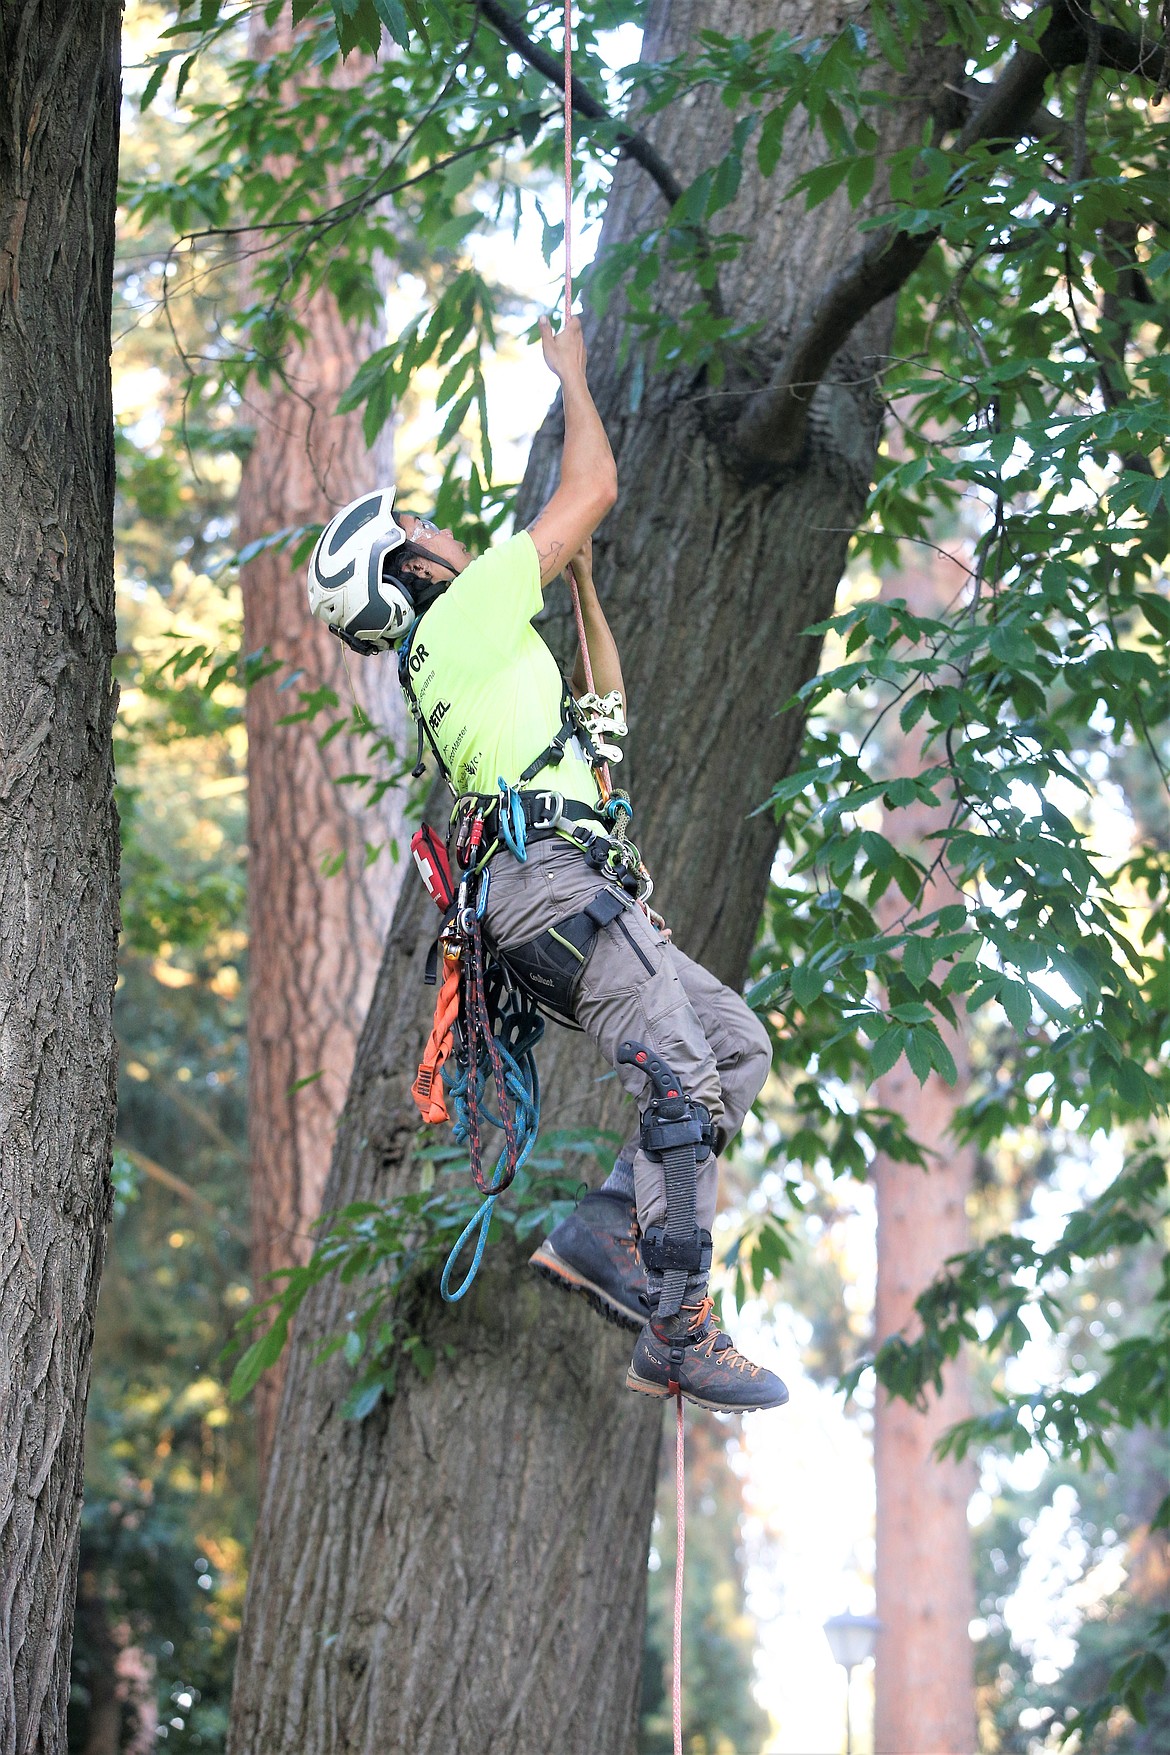 Aneesa Winn begins her ascent in the final round of Pacific Northwest International Society of Arboriculture’s annual Tree Climbing Championship on Saturday at City Park.